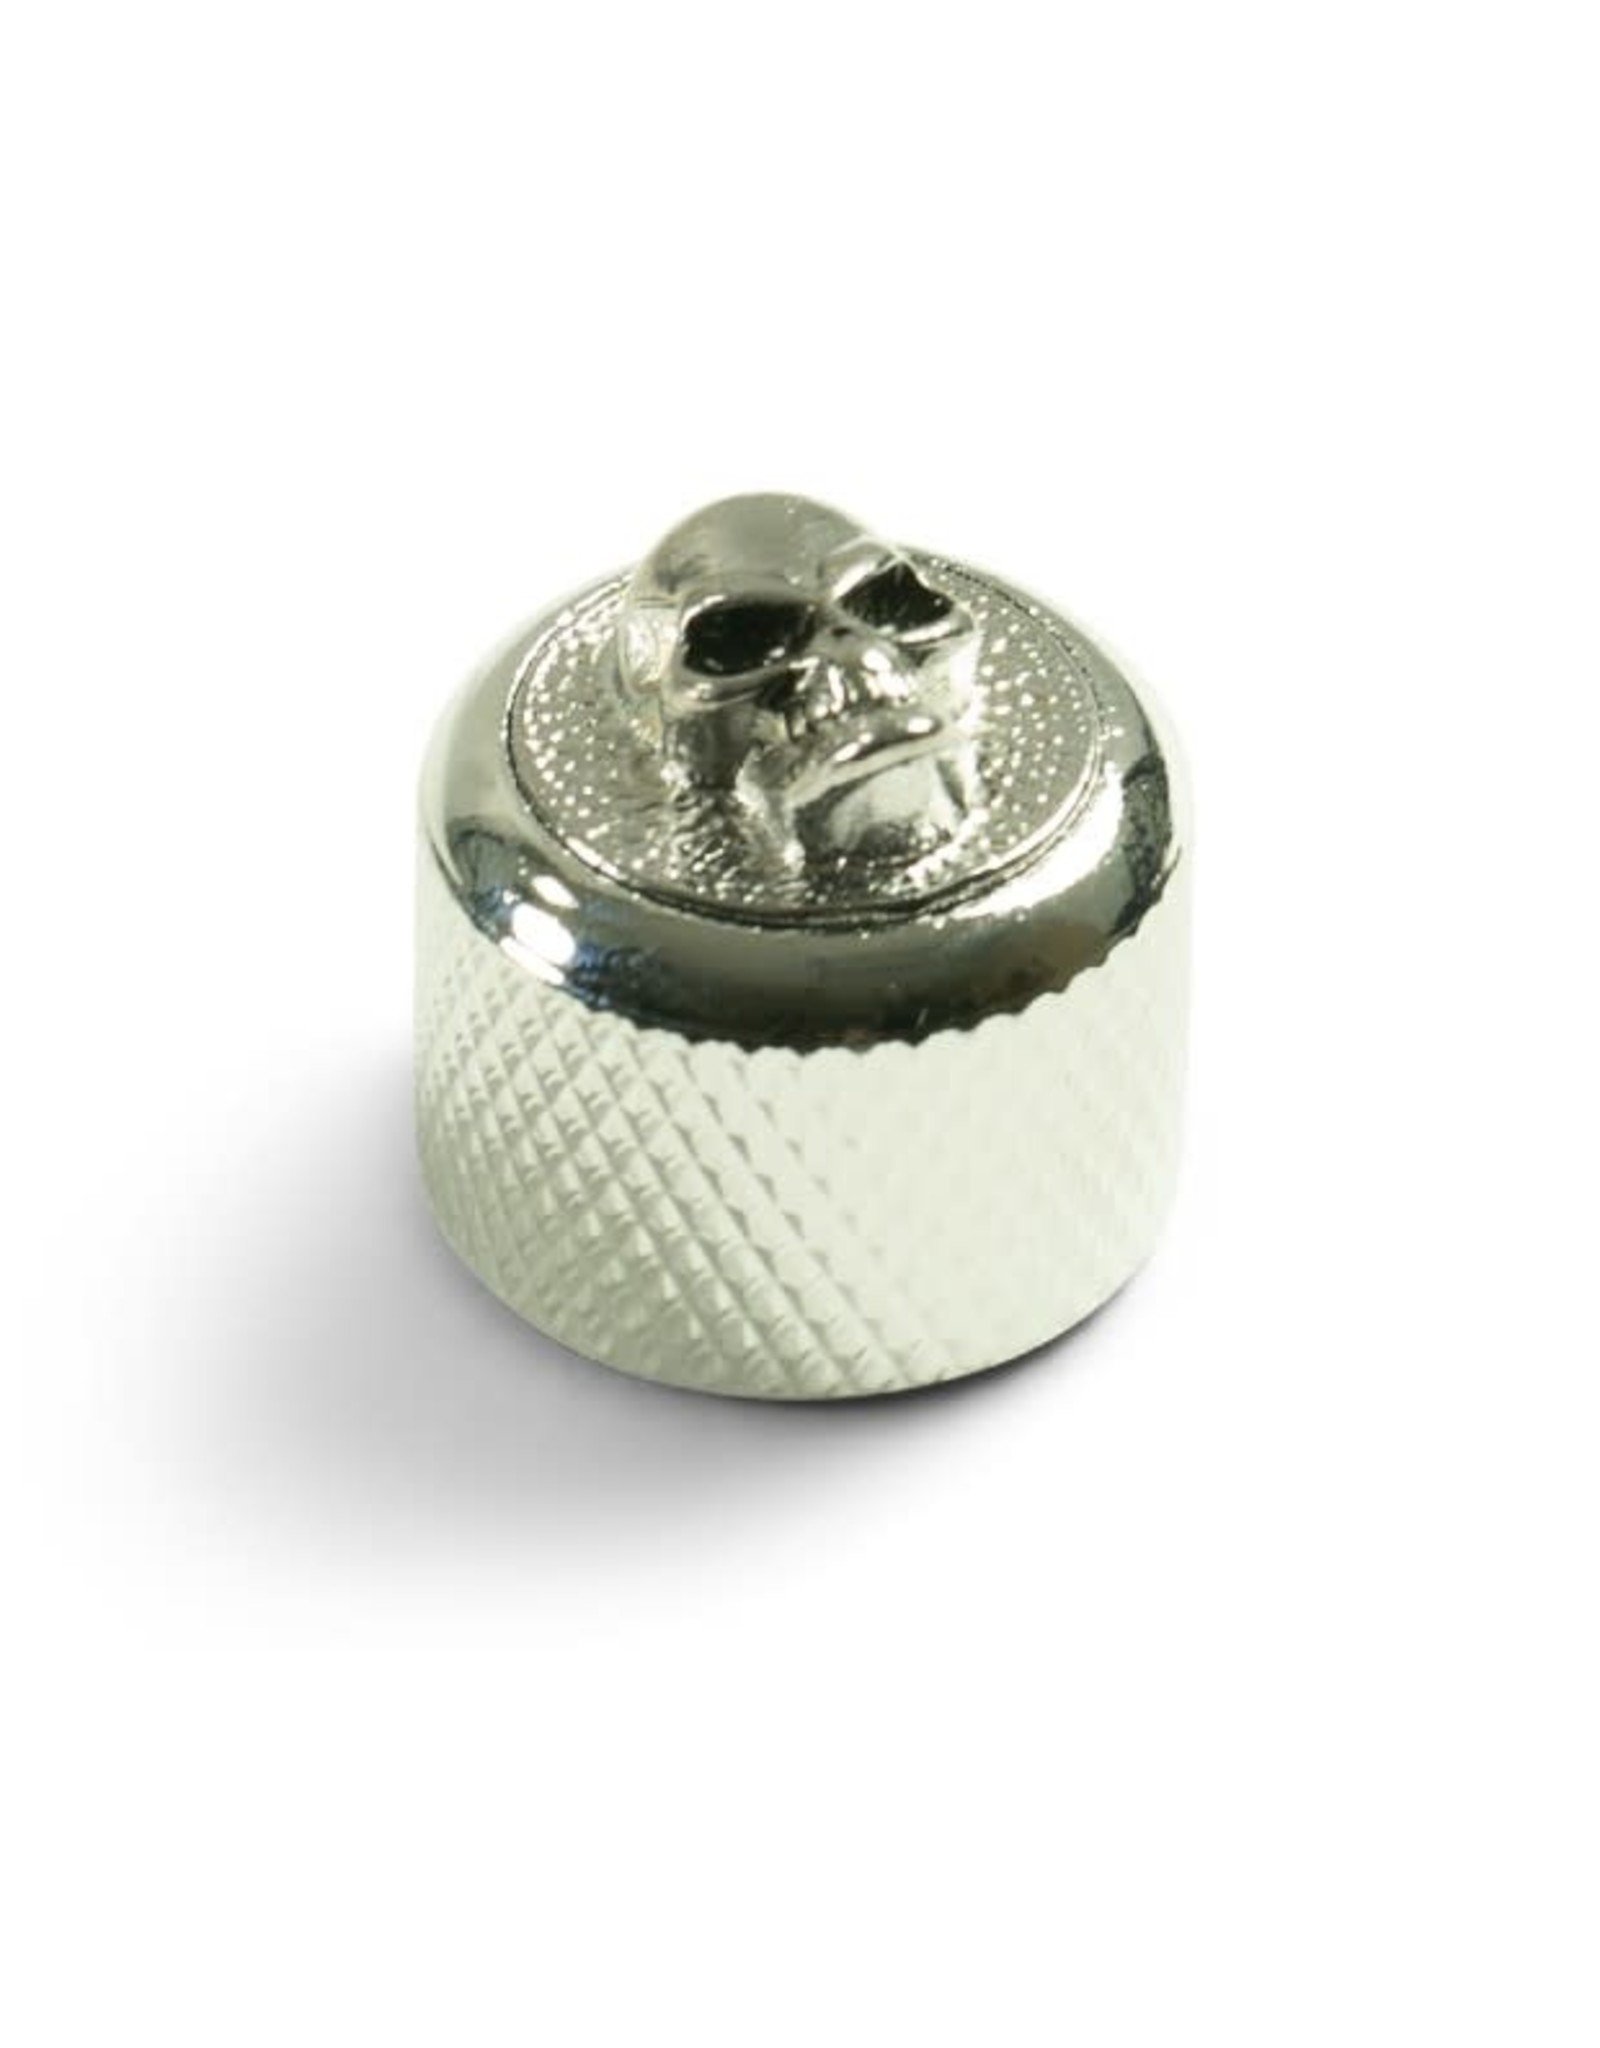 Q-Parts Q-Parts Knob With Angry Skull Inlay Dome Chrome